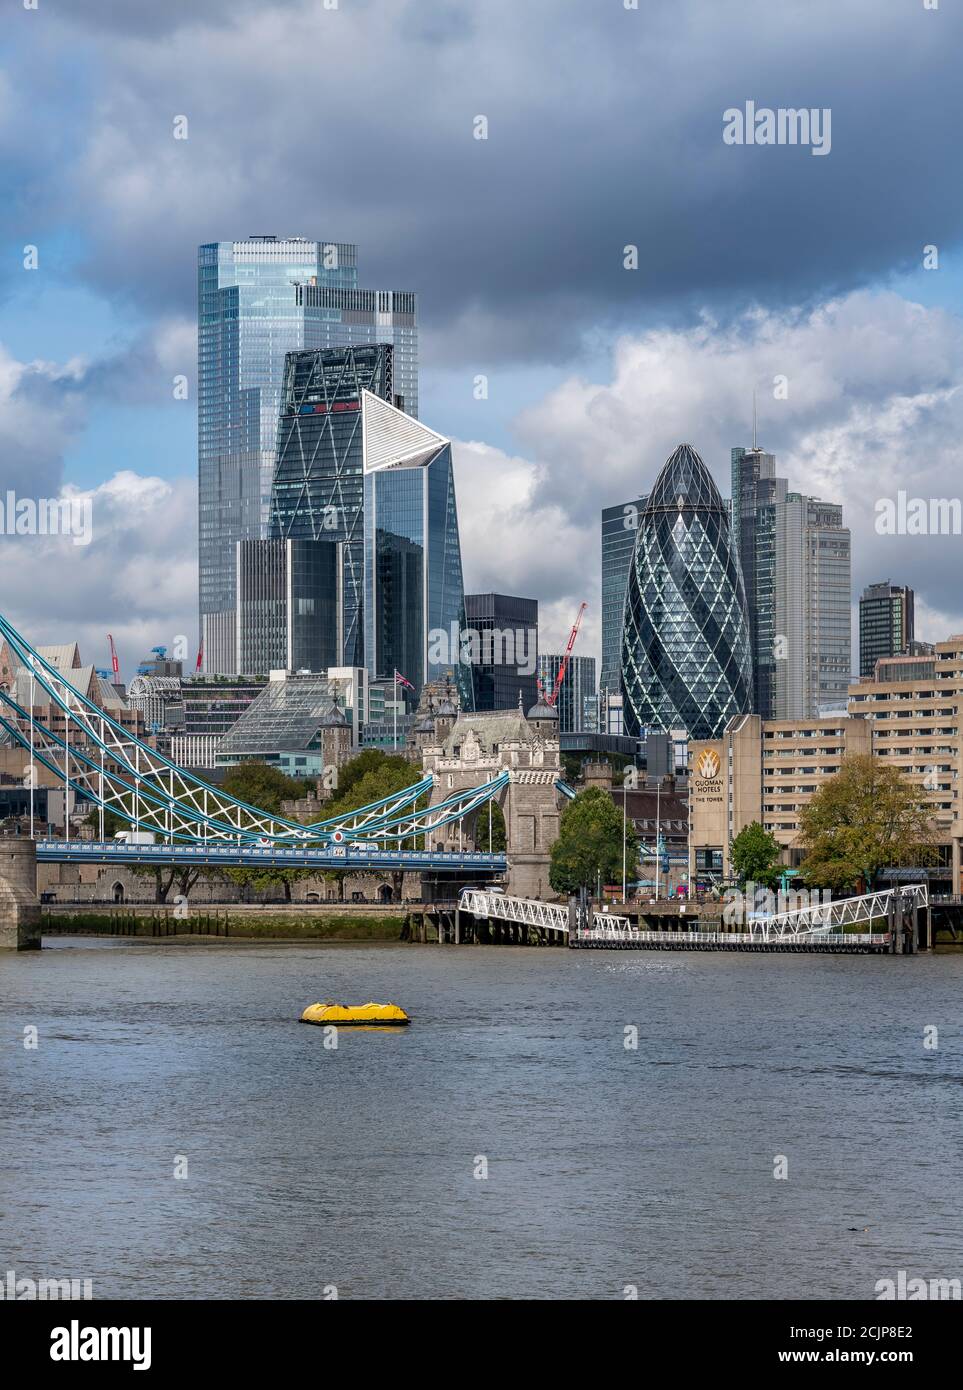 London cityscape, shot from Butler's Wharf. Skyscrapers shown are The Cheesegrater, The Scalpel, The Gherkin and the new tallest one called Twentytwo. Stock Photo